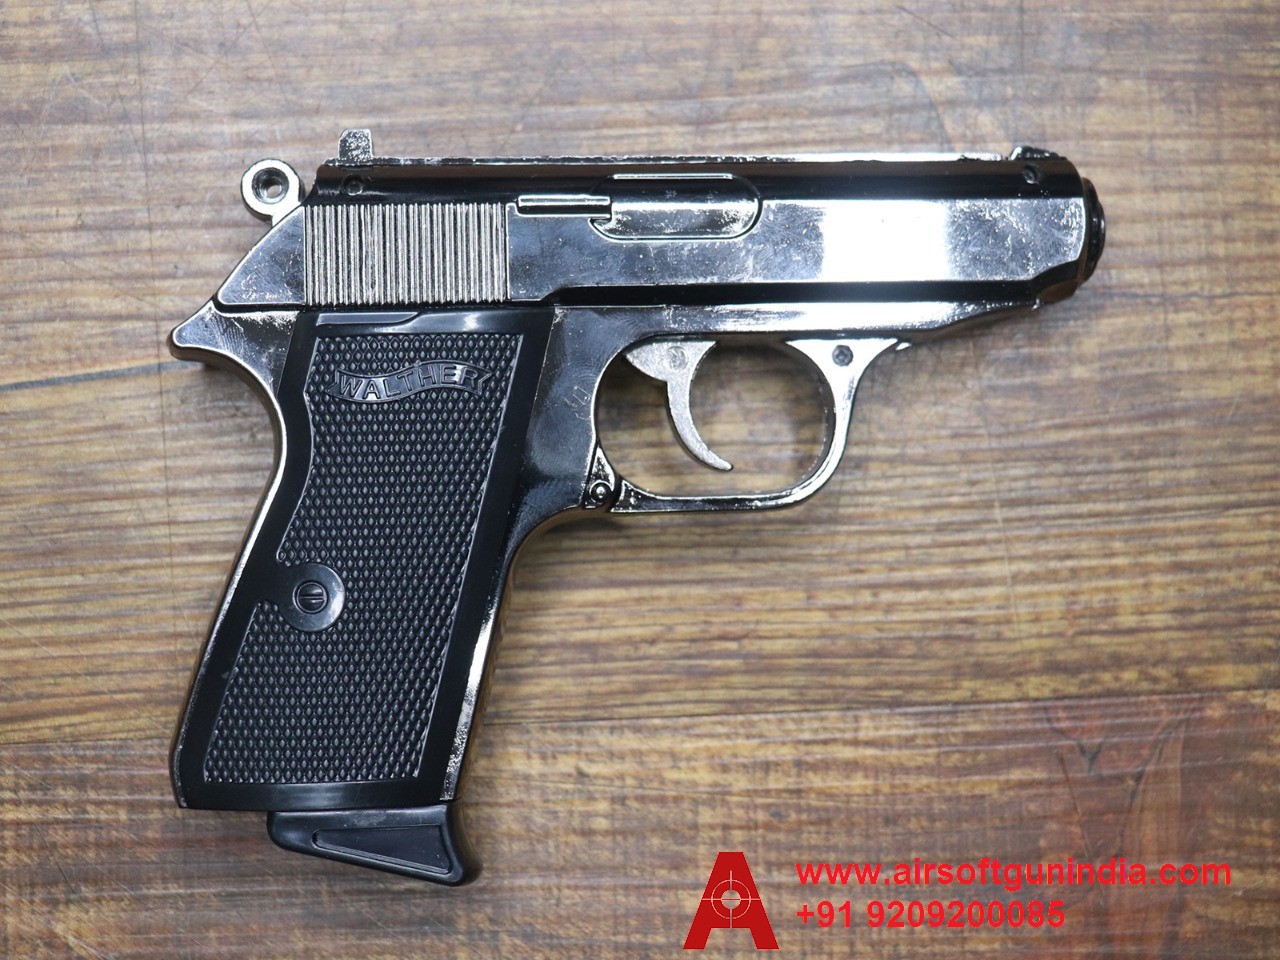 WALTHER PPK SILVER REPLICA LIGHTER BY AIRSOFT GUN INDIA